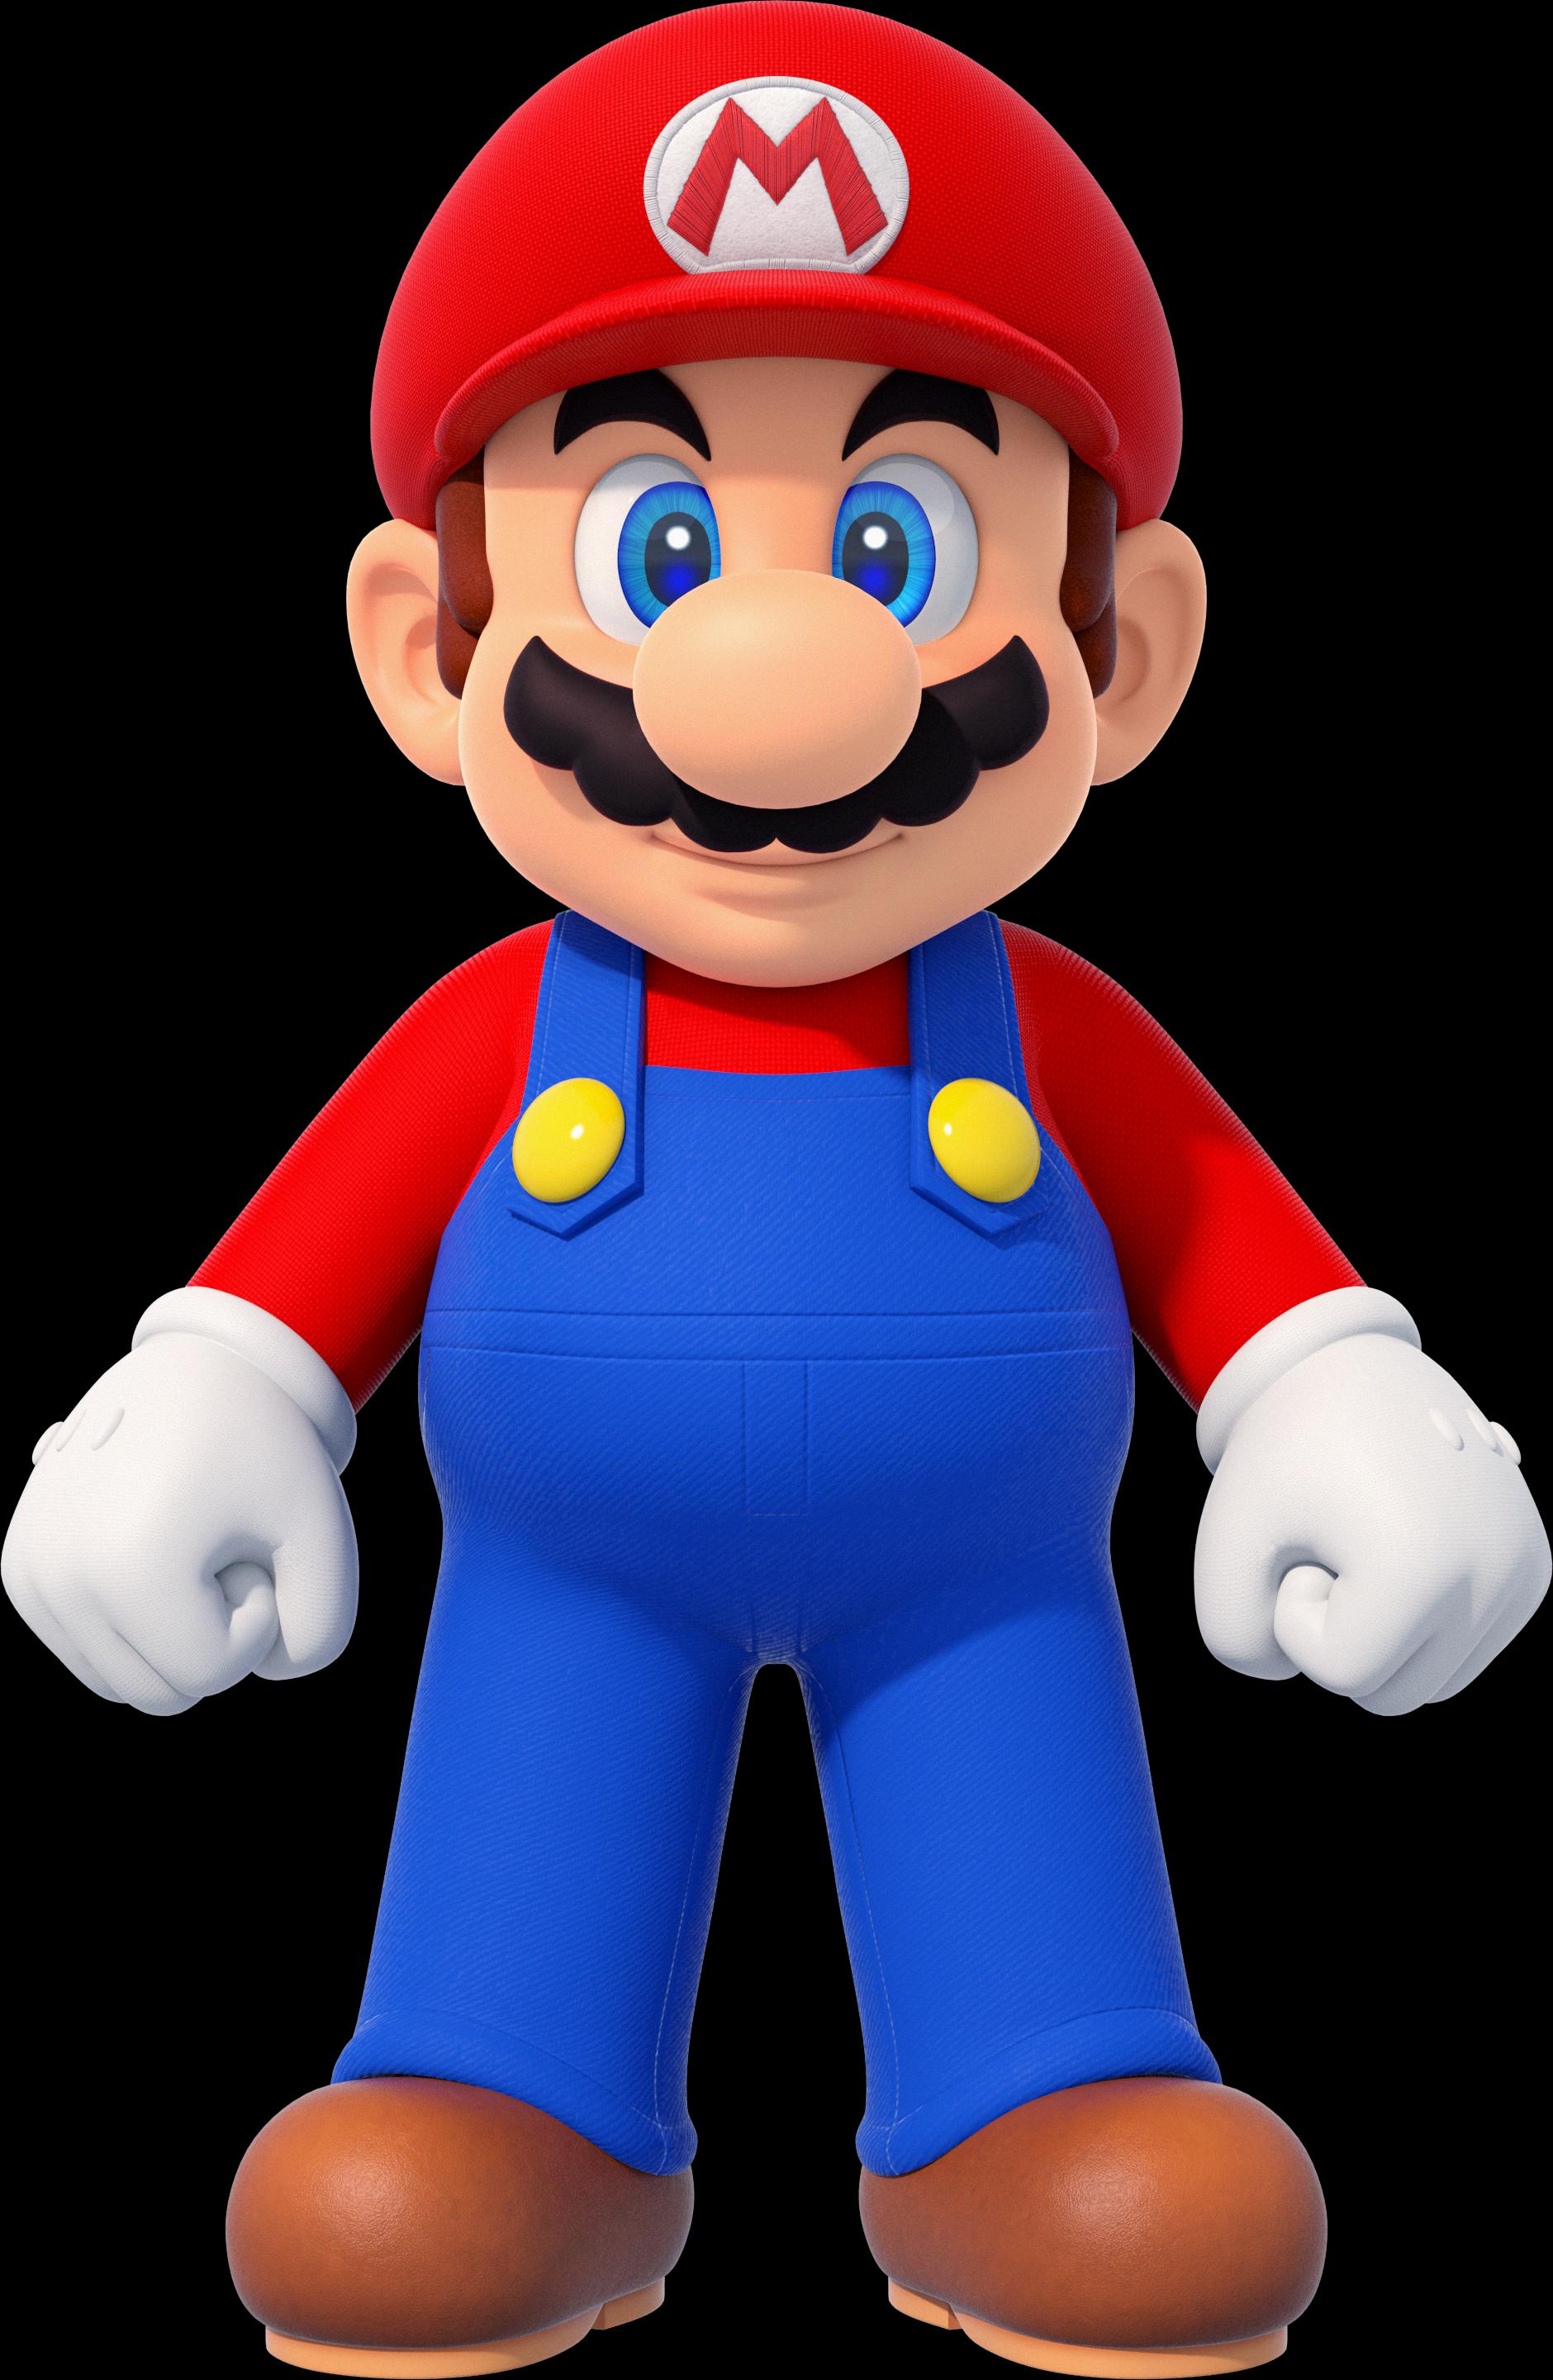 how old is mario